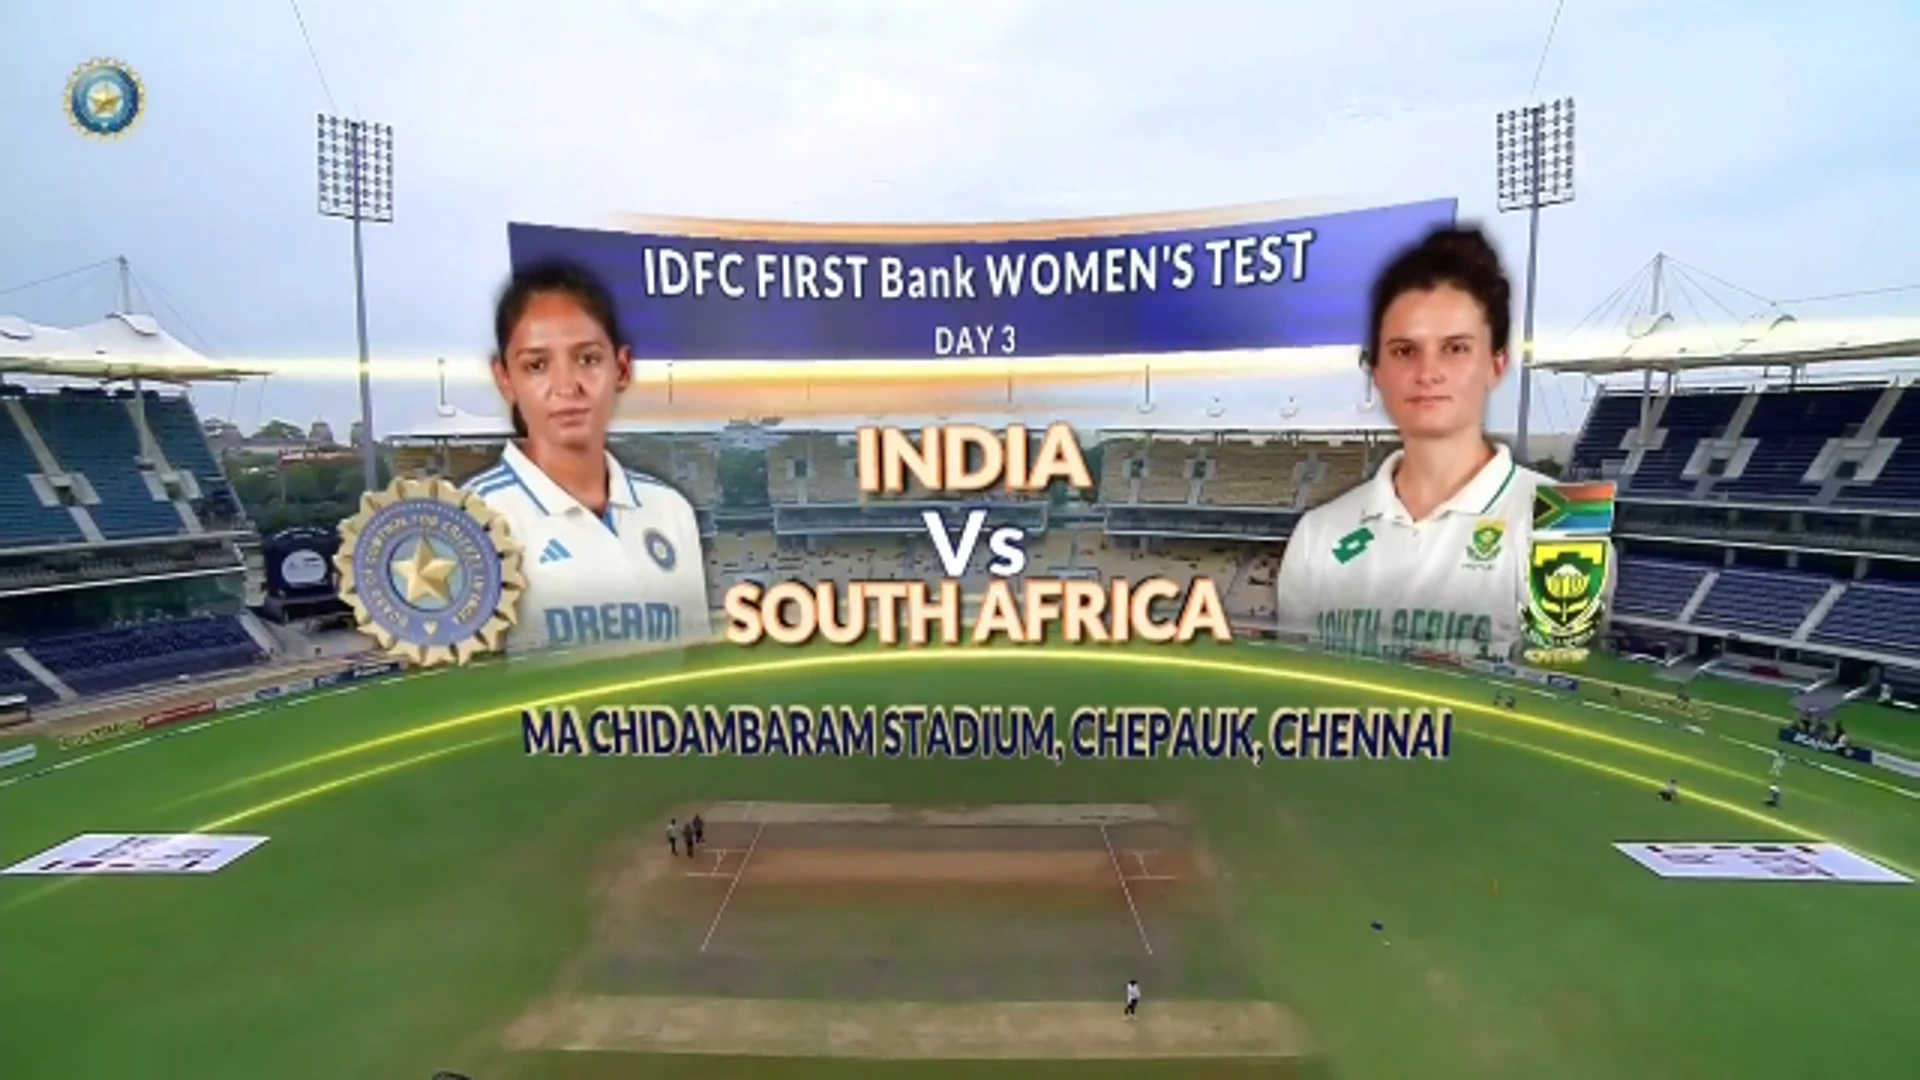 India v South Africa | Test Day 3 | Highlights | IND Women's Cricket - Test Series